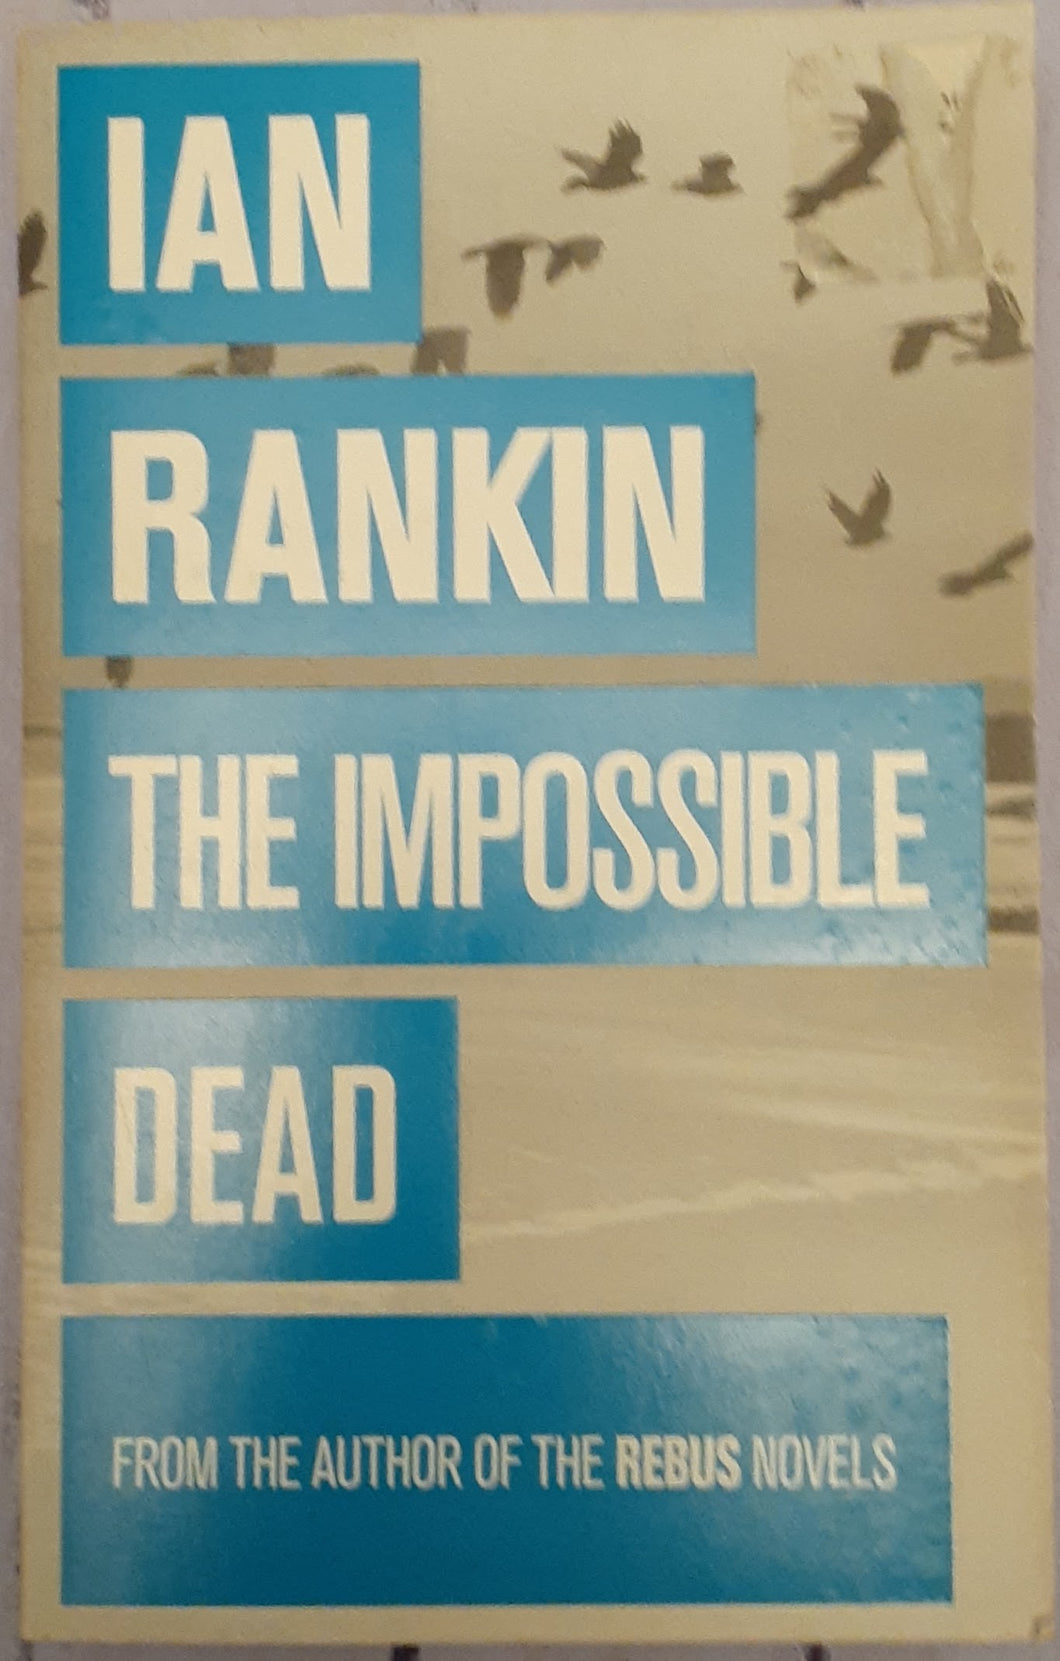 The Impossible Dead